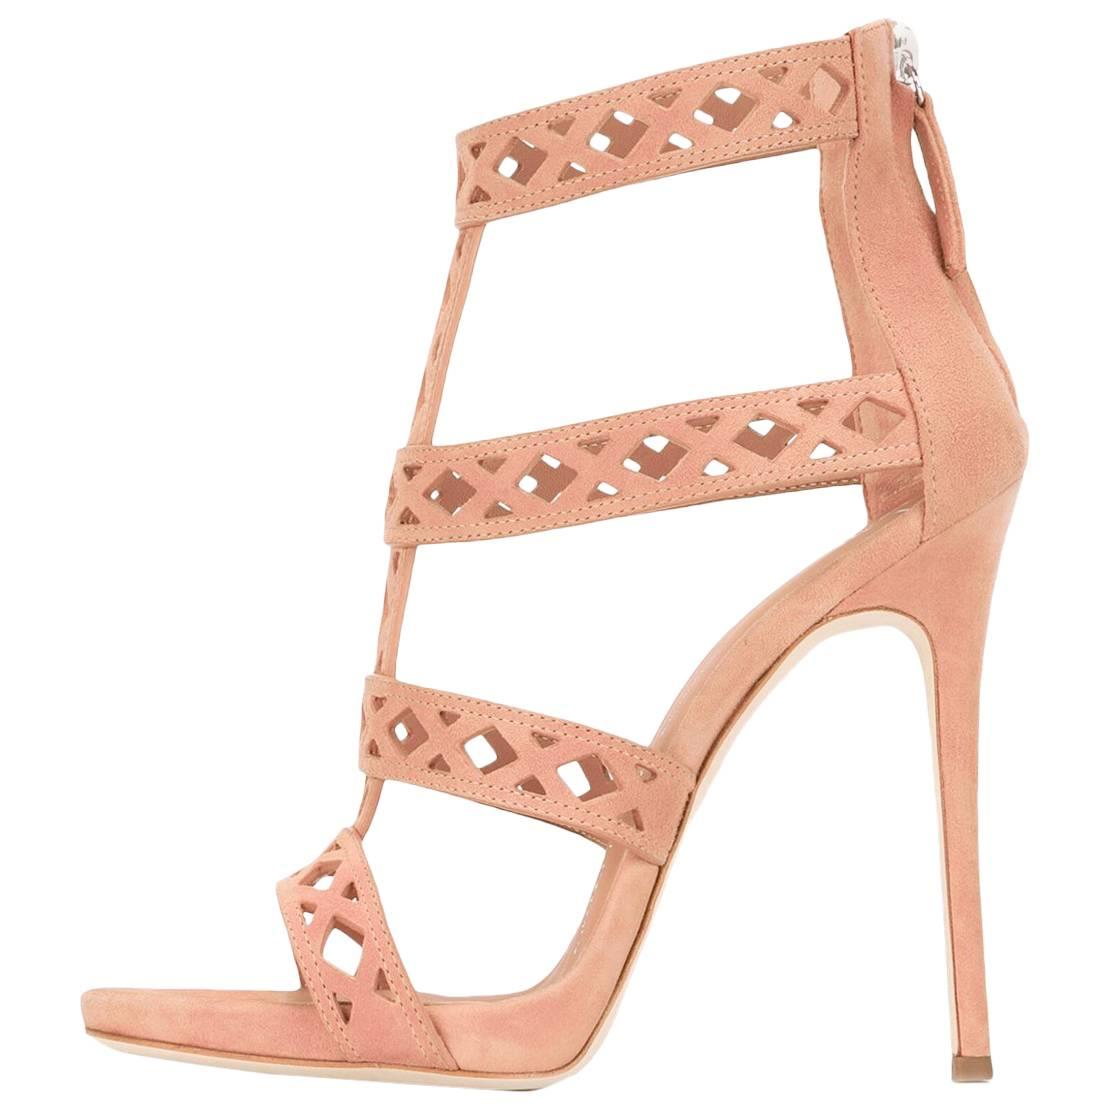 Giuseppe Zanotti New Blush Suede Cut Out Gladiator Sandals Heels in Box